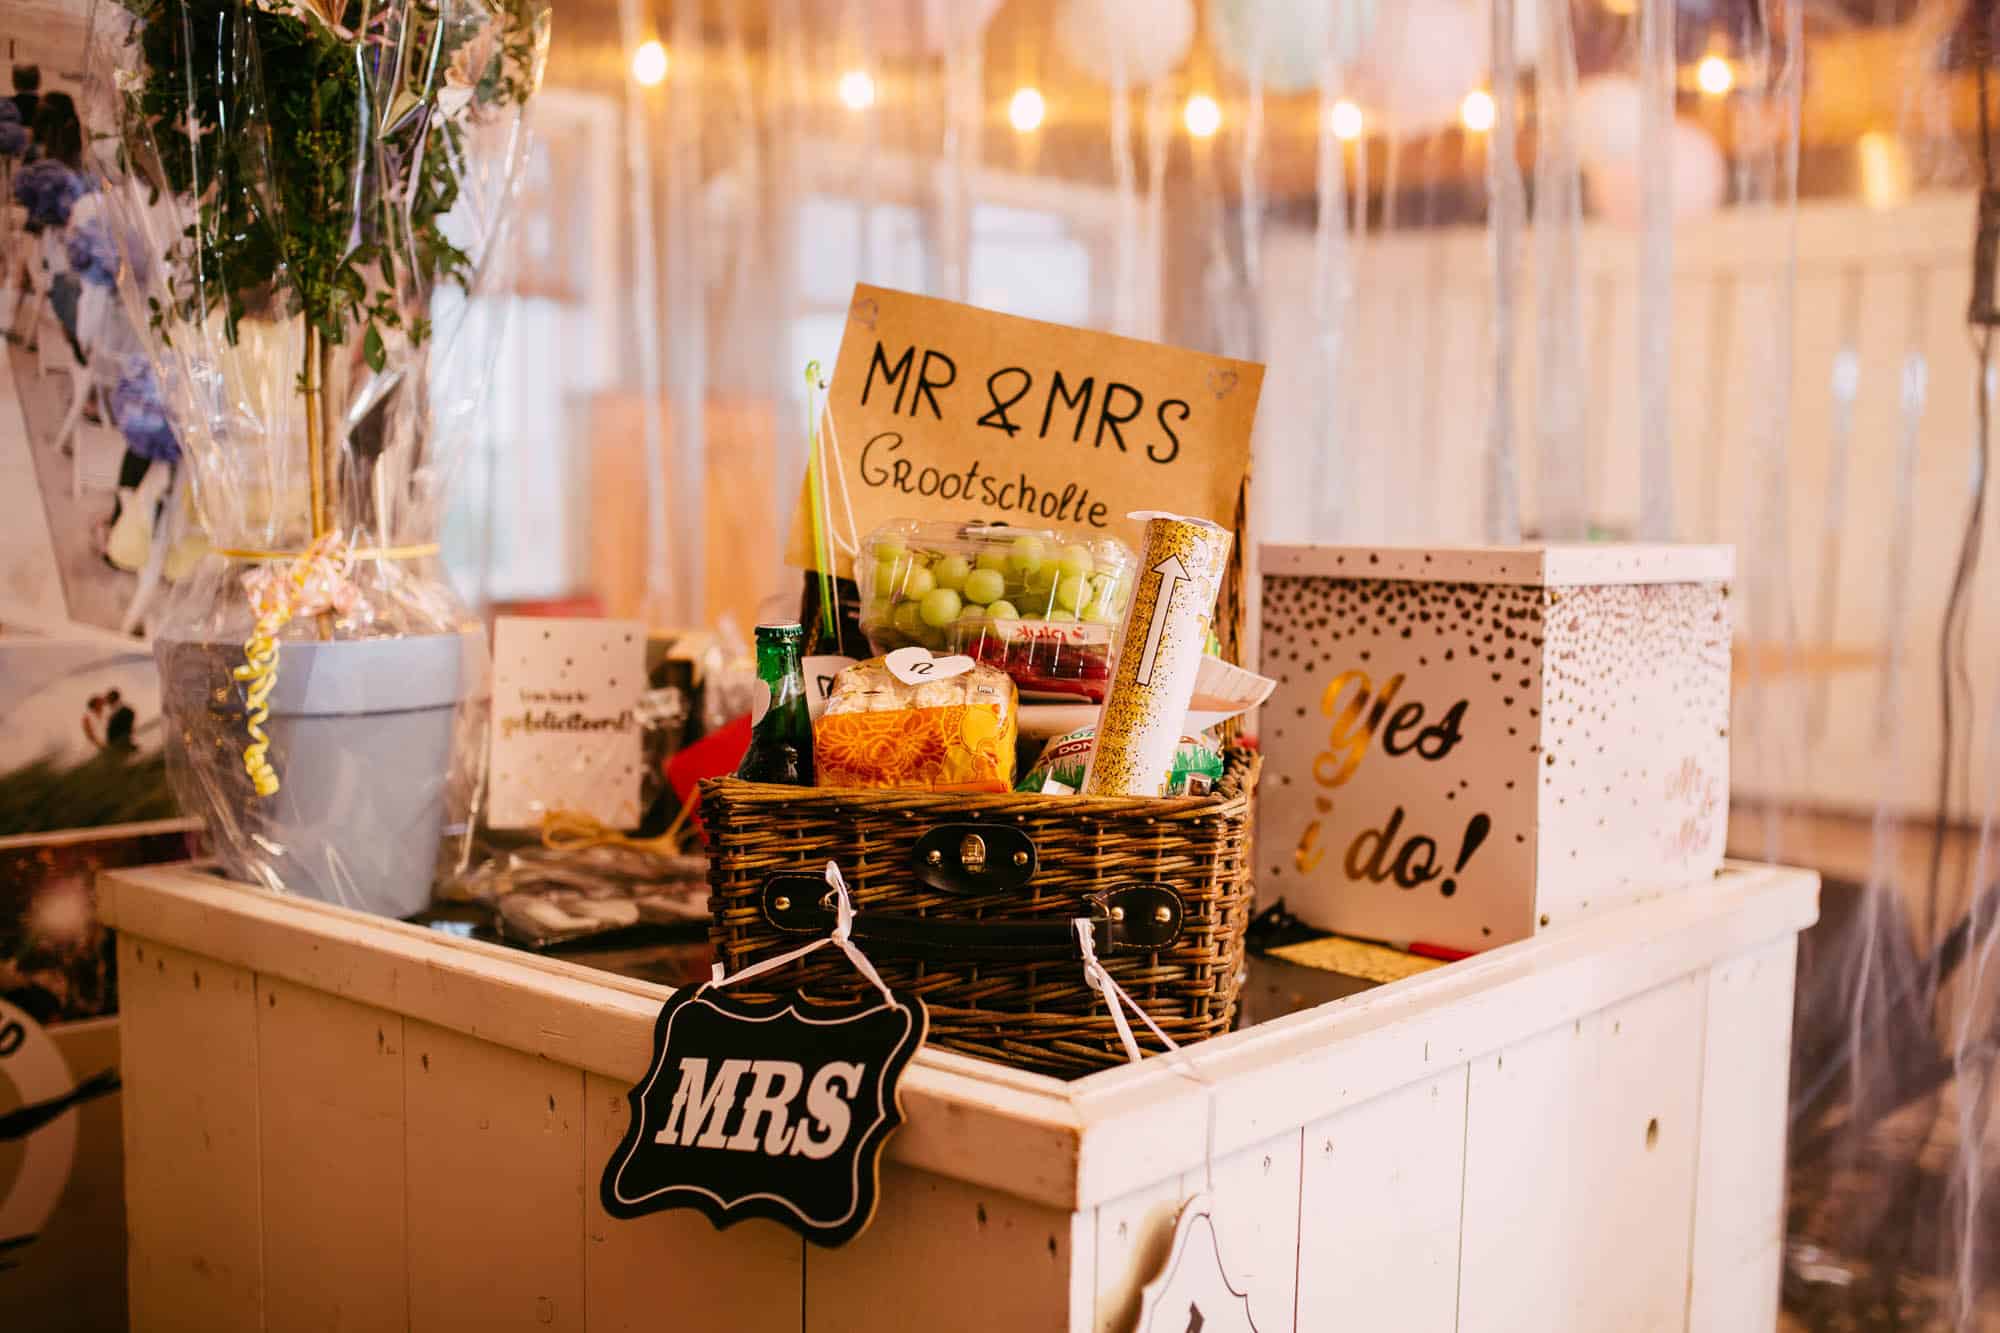 A wedding day gift: A table with a basket of Mr and Mrs plates and balloons.